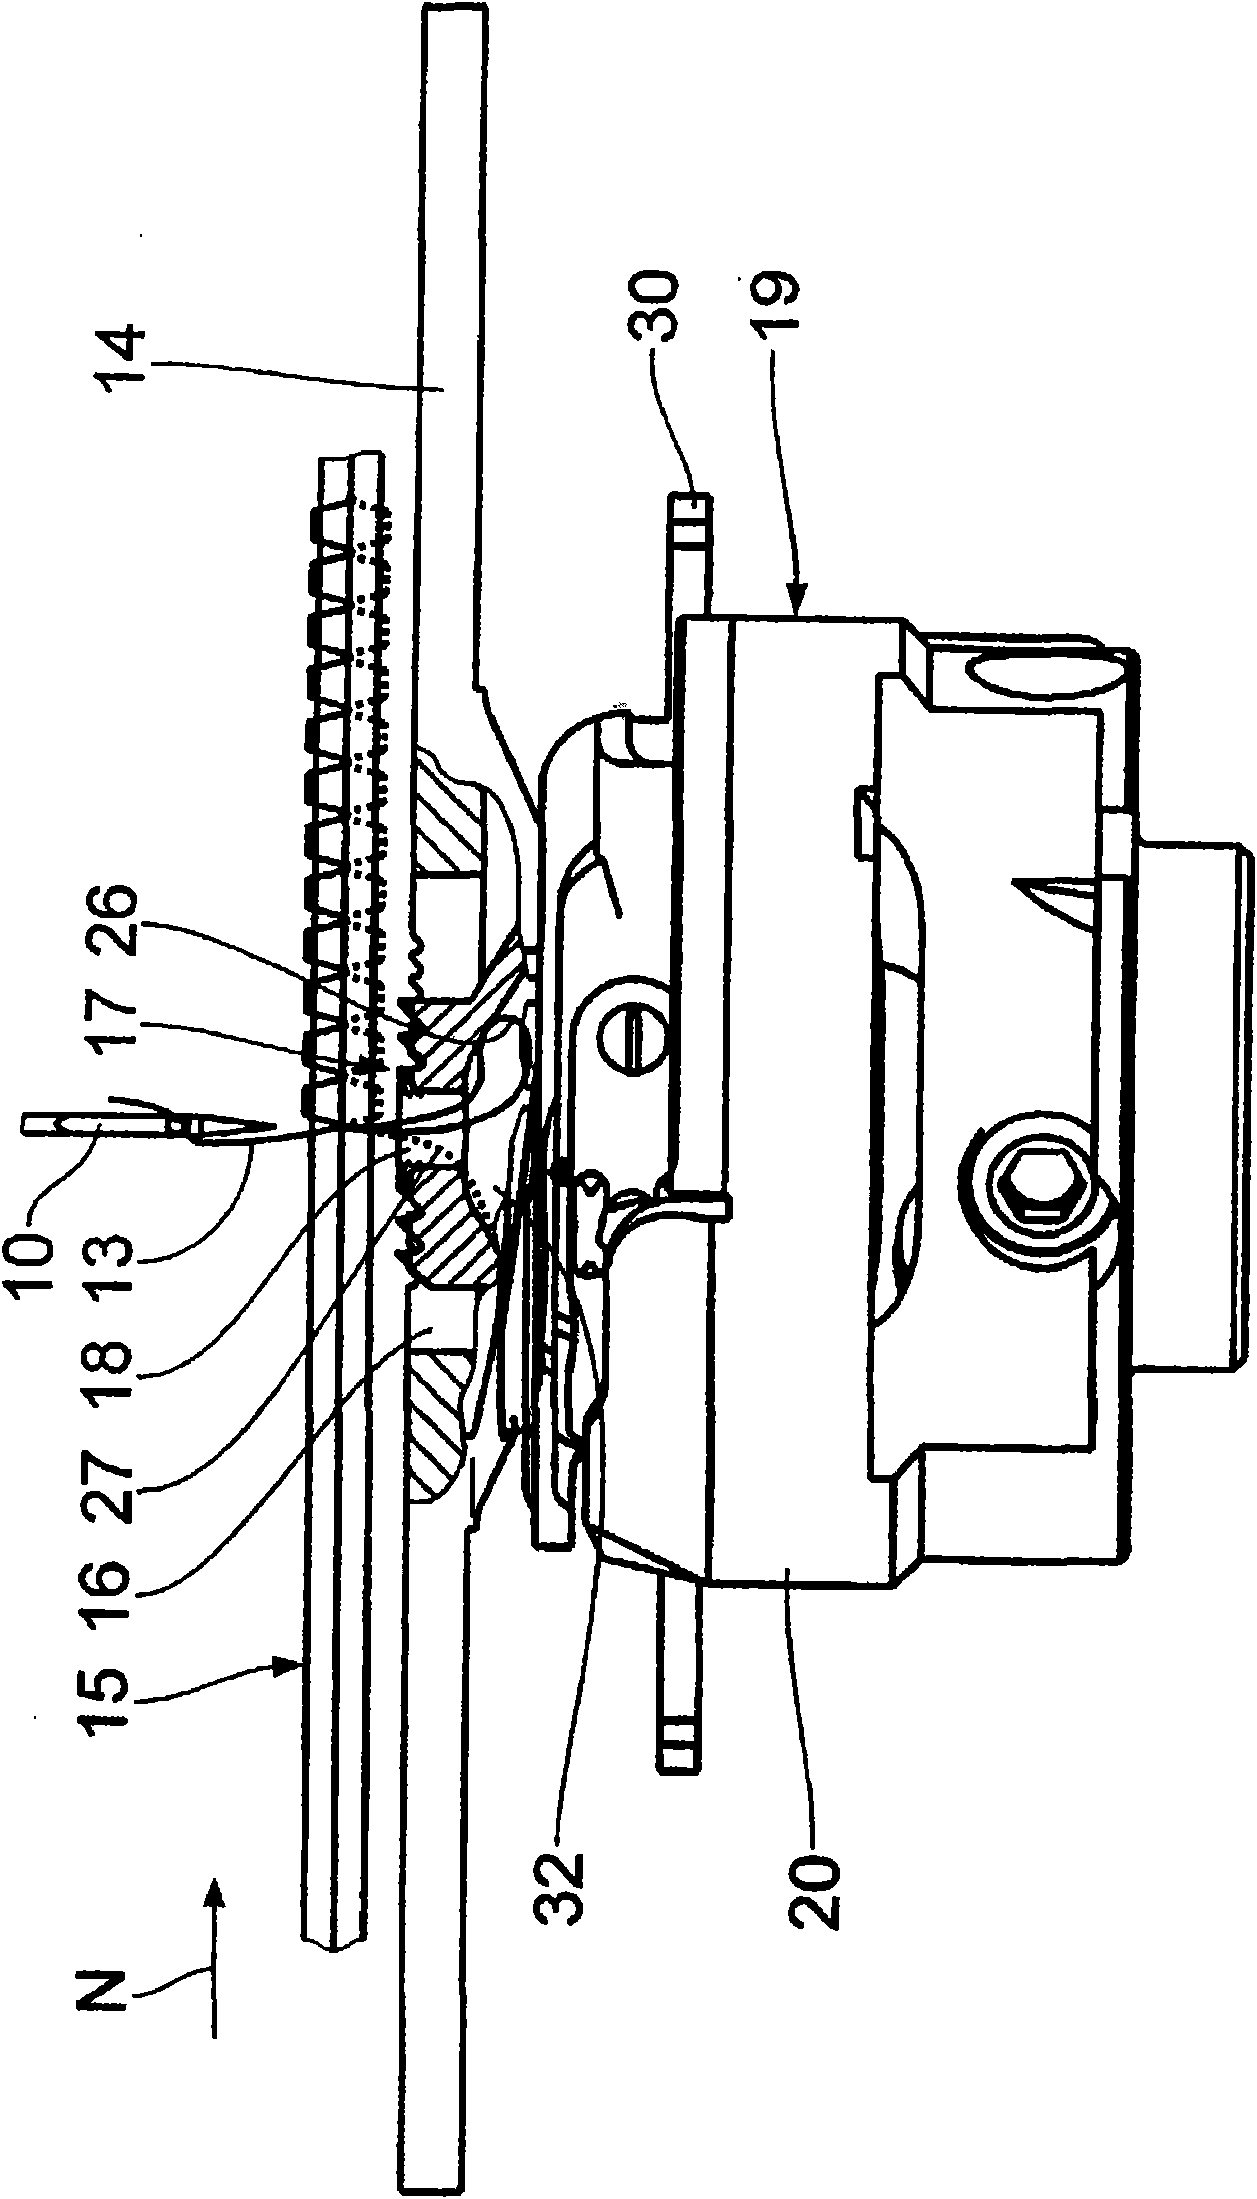 Transporter for transporting sewing material while operating a sewing machine